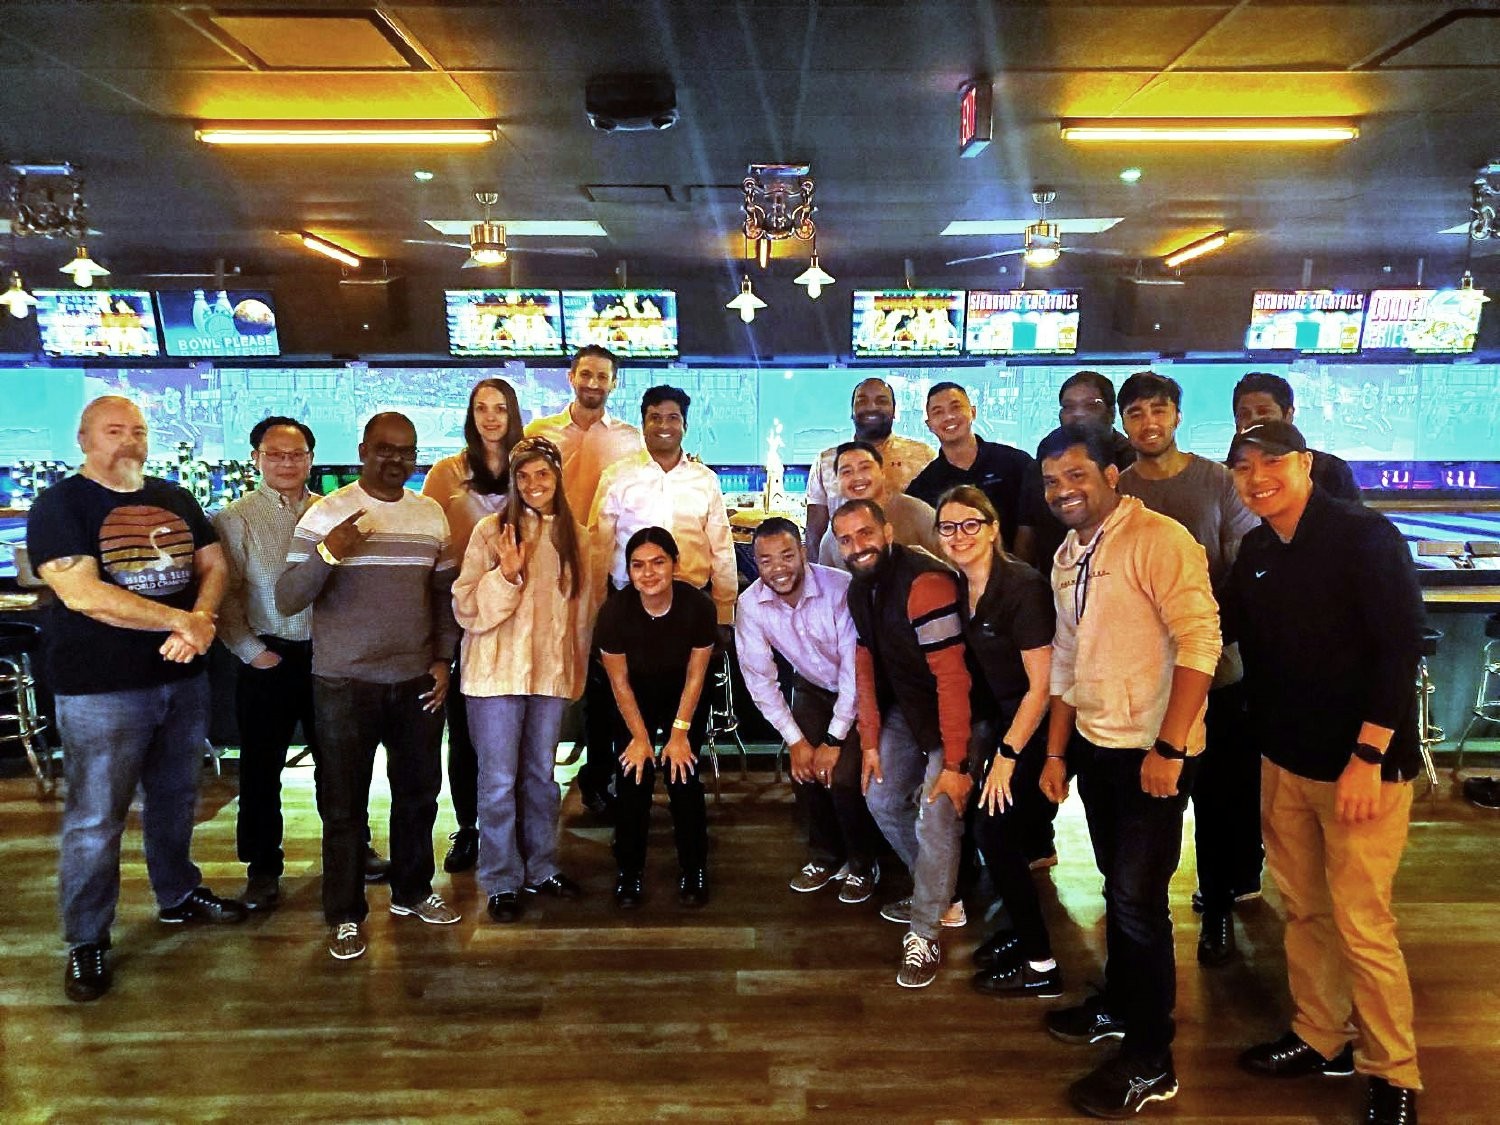 Sky bowling happy hour with local members of our team